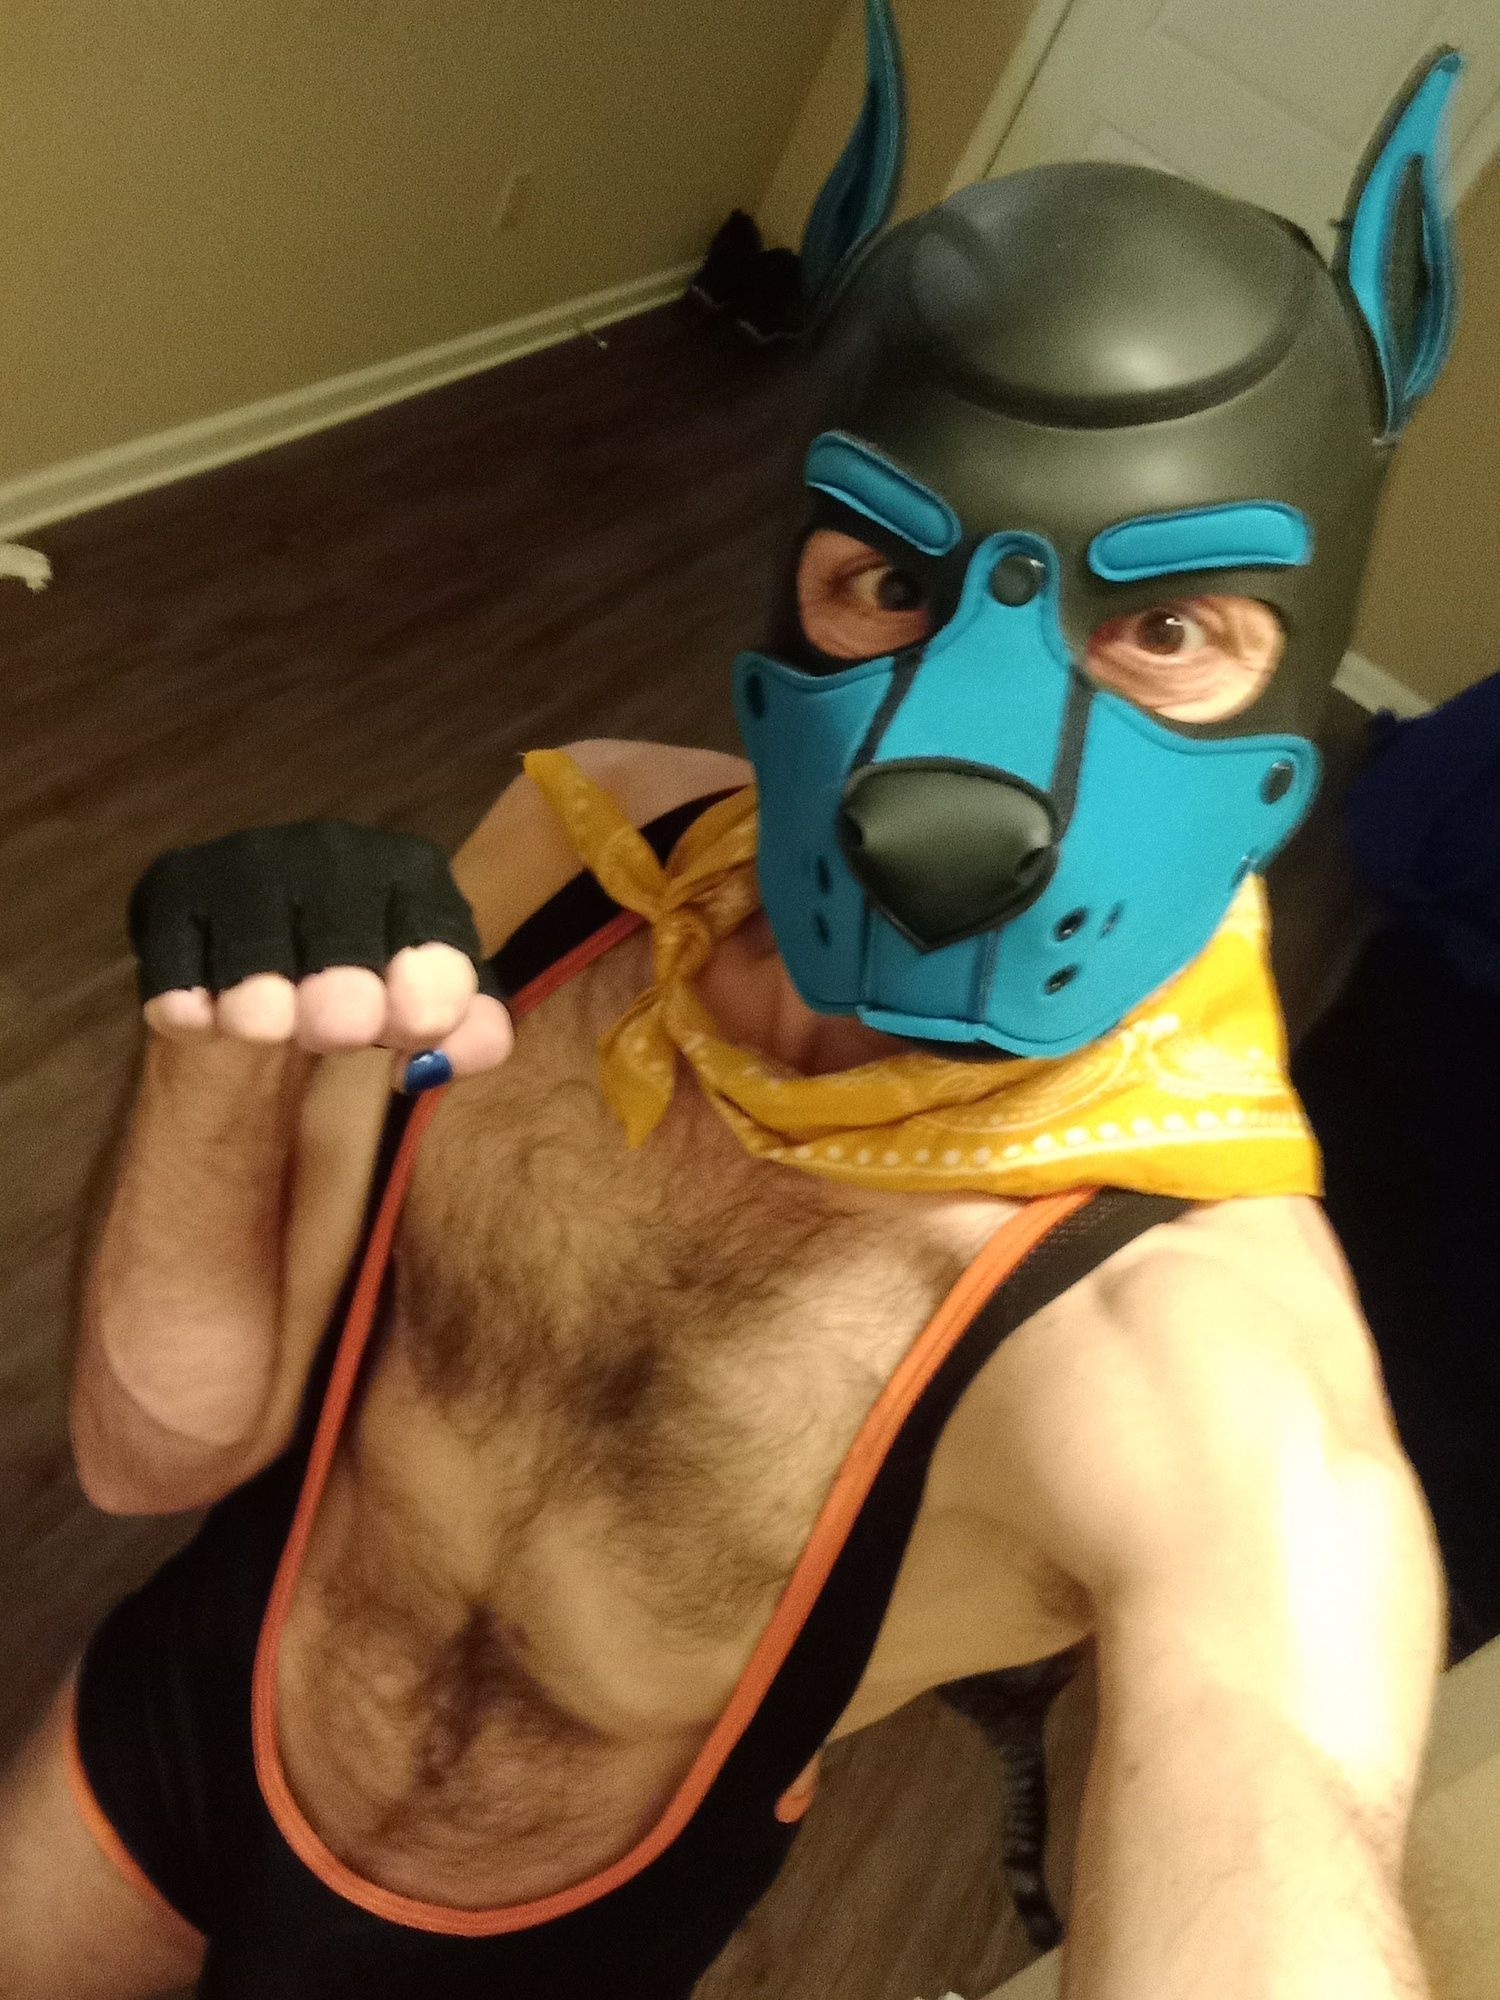 Puppers Showing off in underwear...again #23